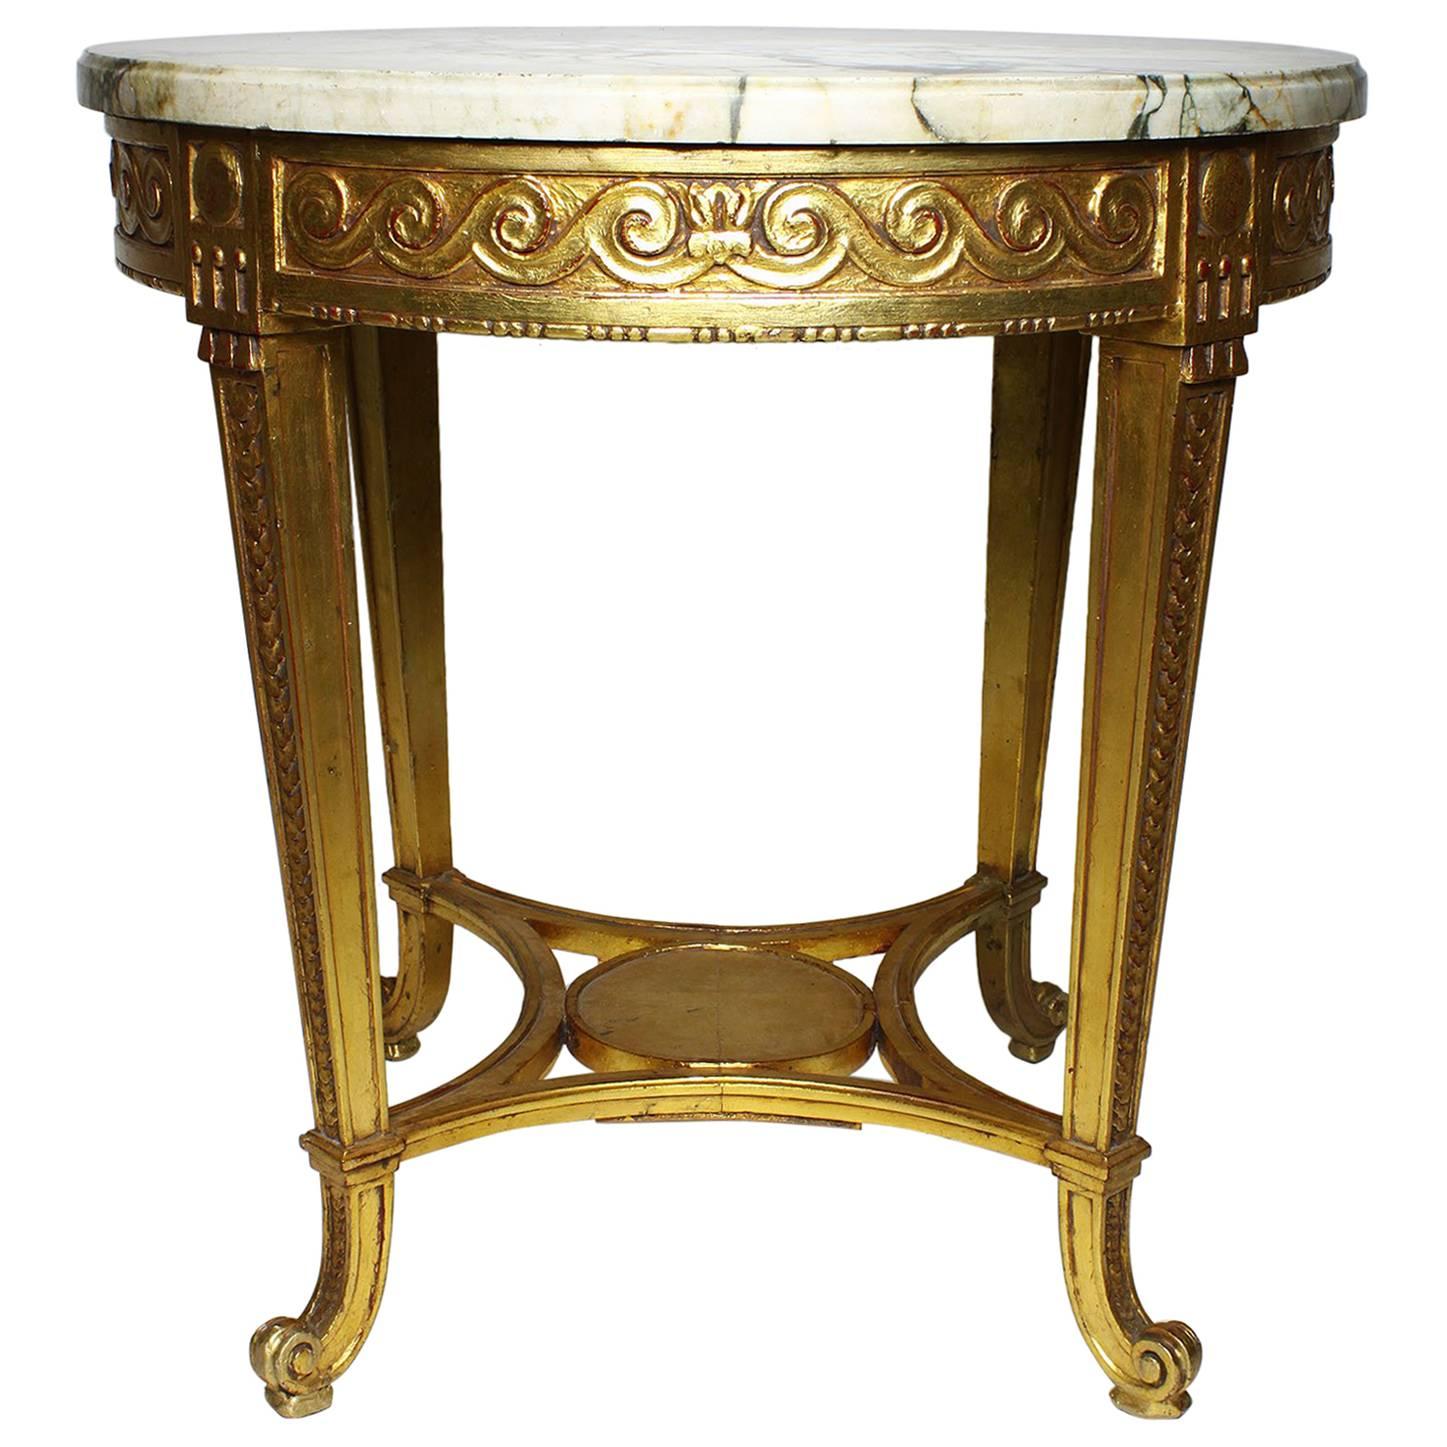 French Louis XV Style Giltwood Carved Gueridon Side Table with Marble Top